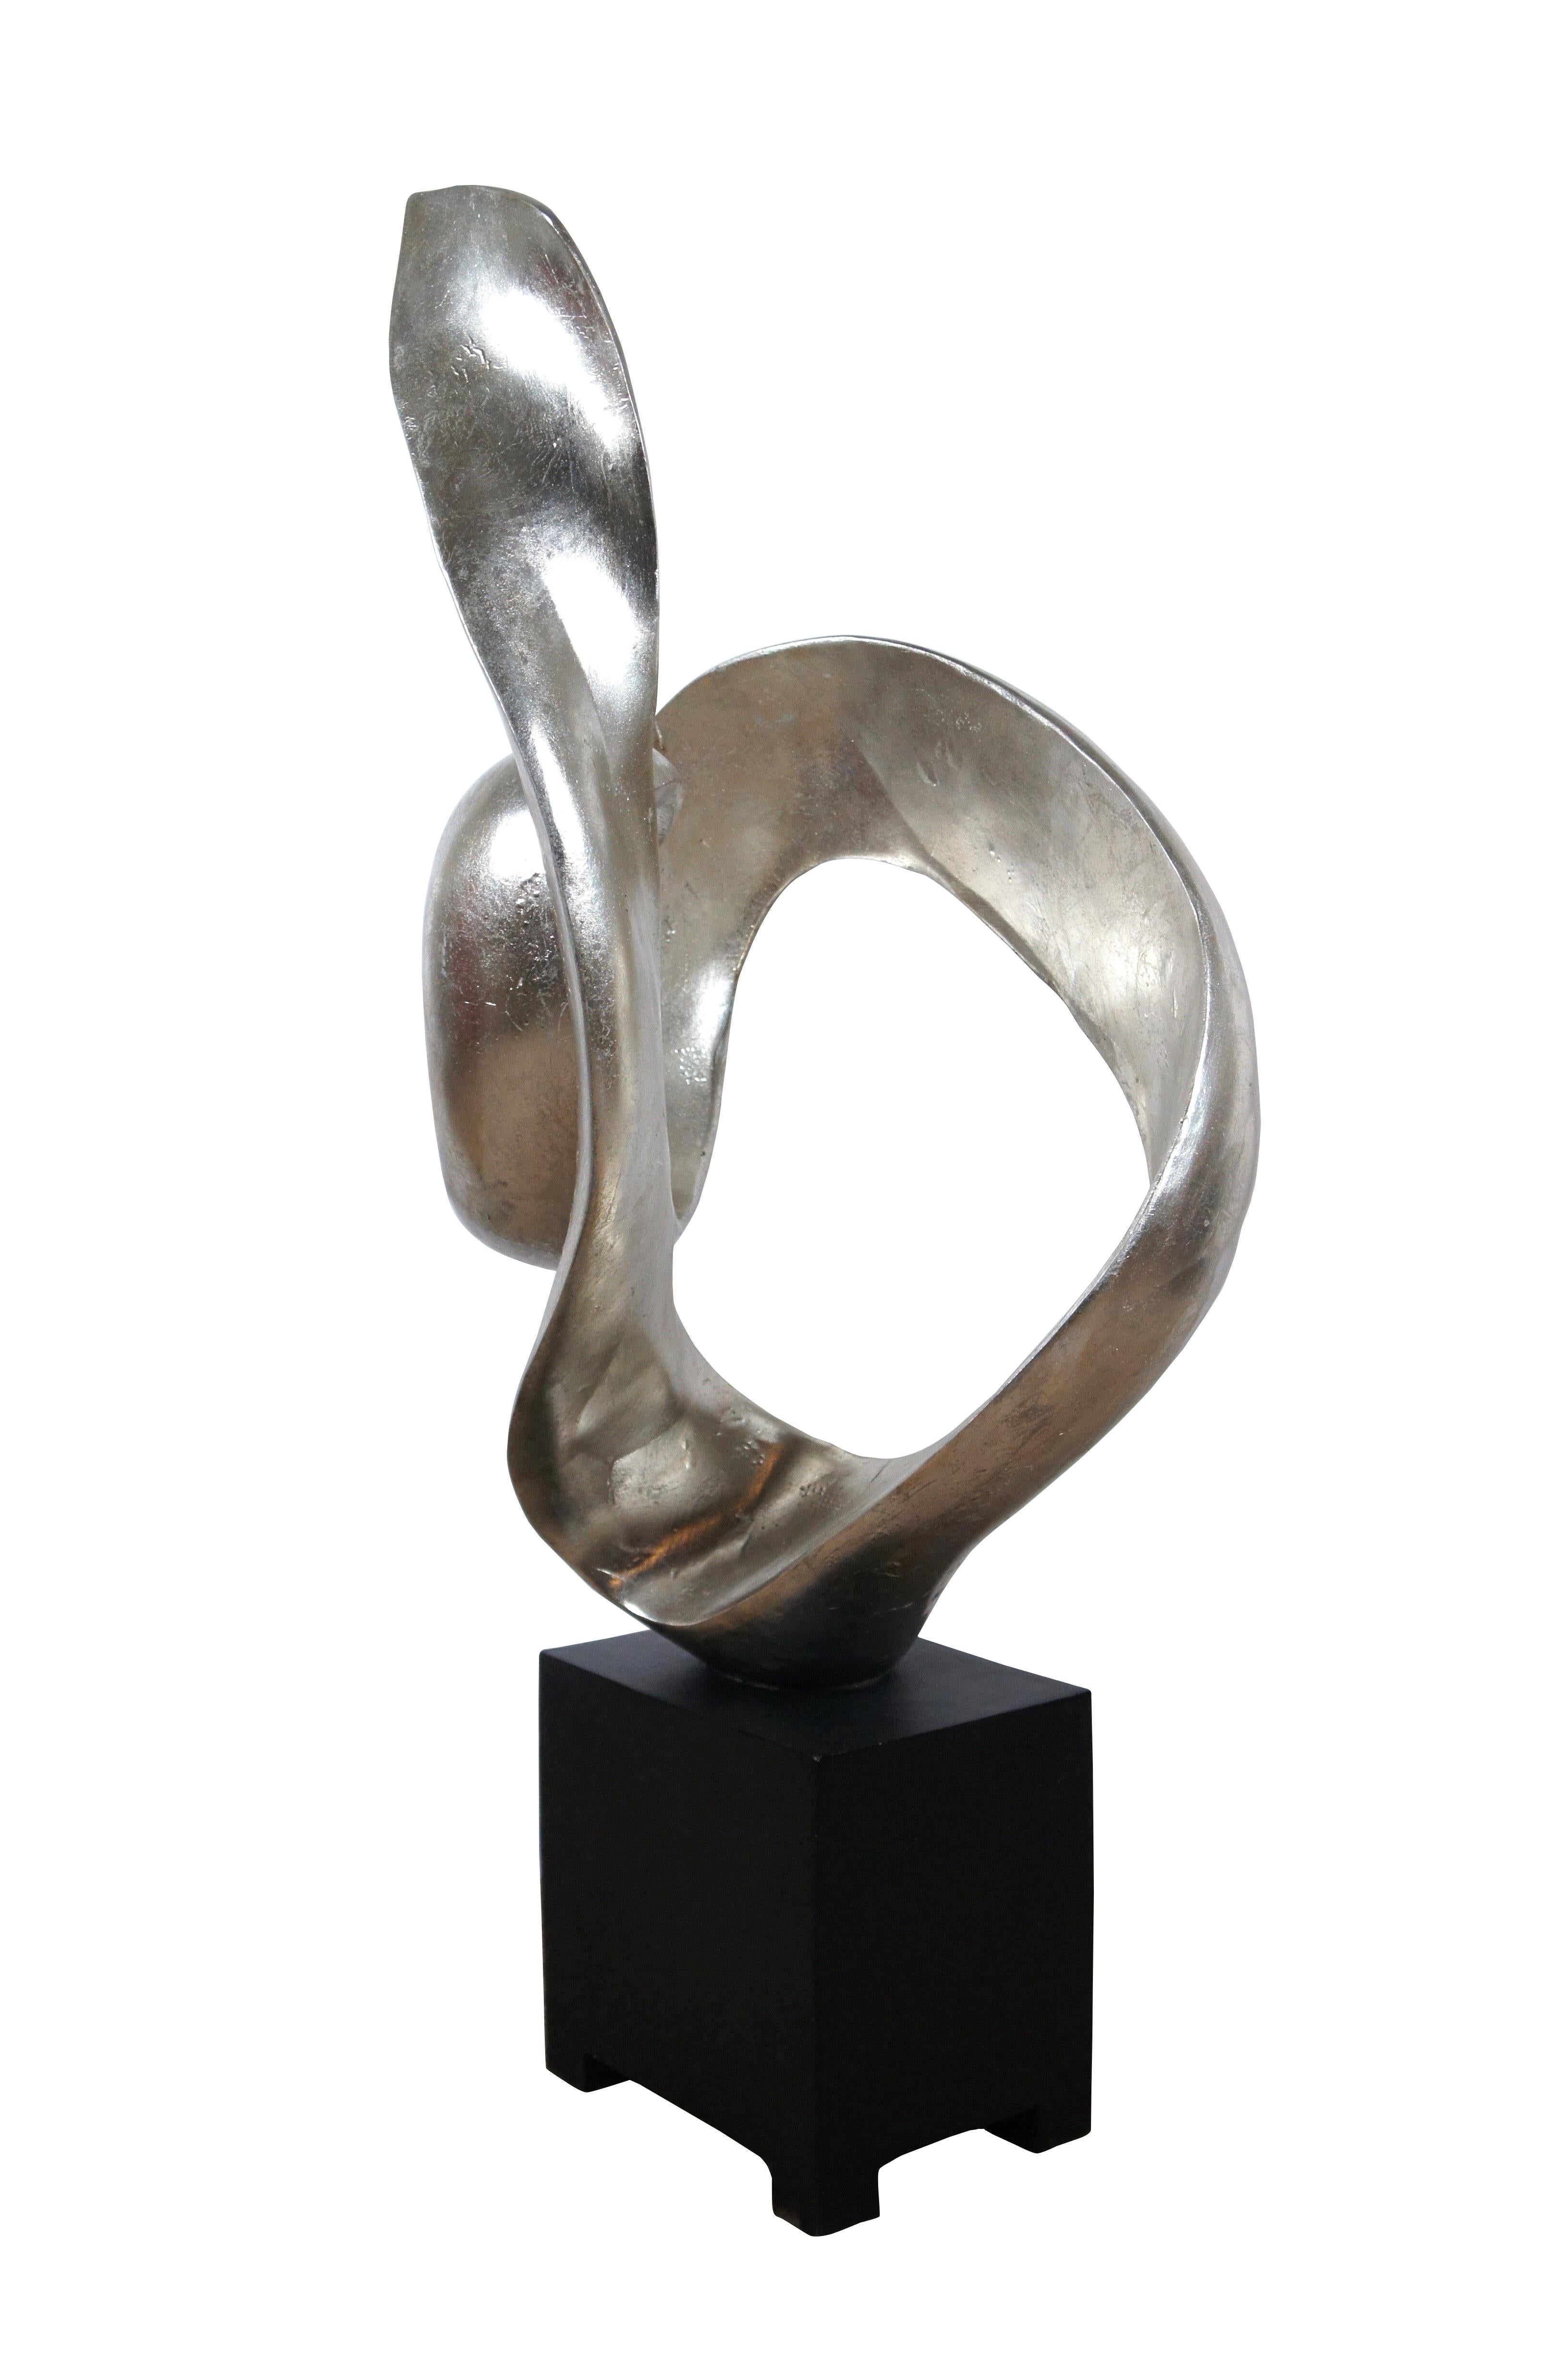 Late 20th century composite sculpture by Austin Productions featuring a rectangular black base supporting a silver gilt swirling abstract shape.

Dimensions:
18